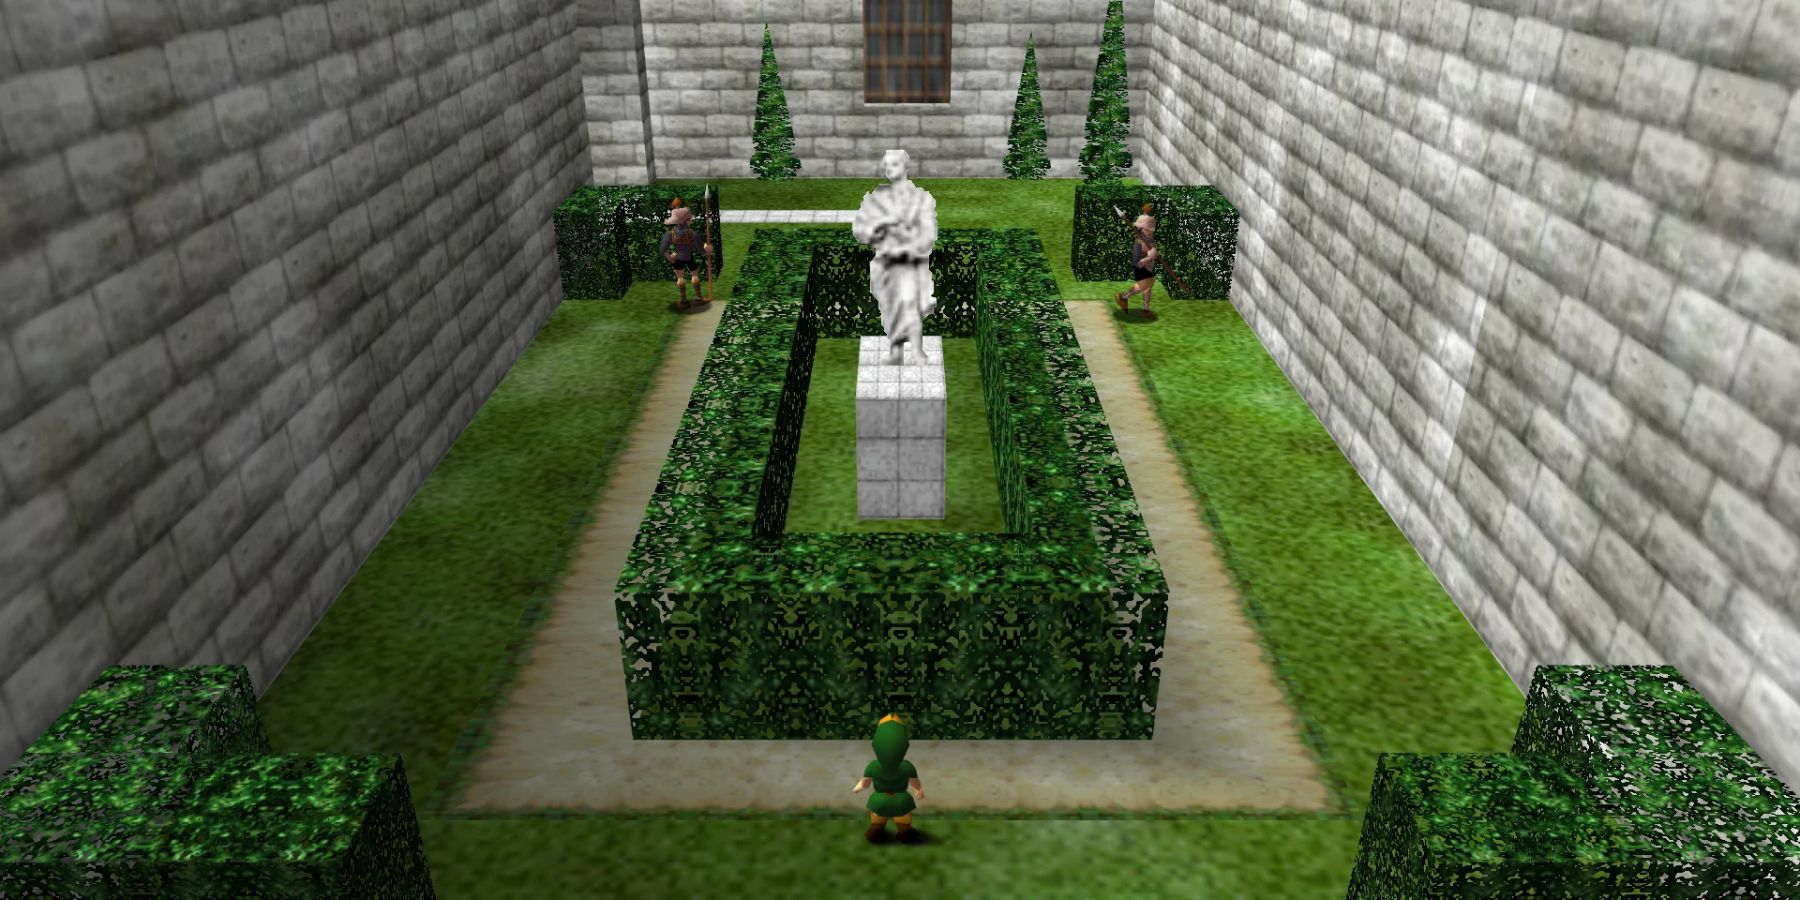 Link's infiltration of Hyrule Castle is the second breach of the walls in recent memory